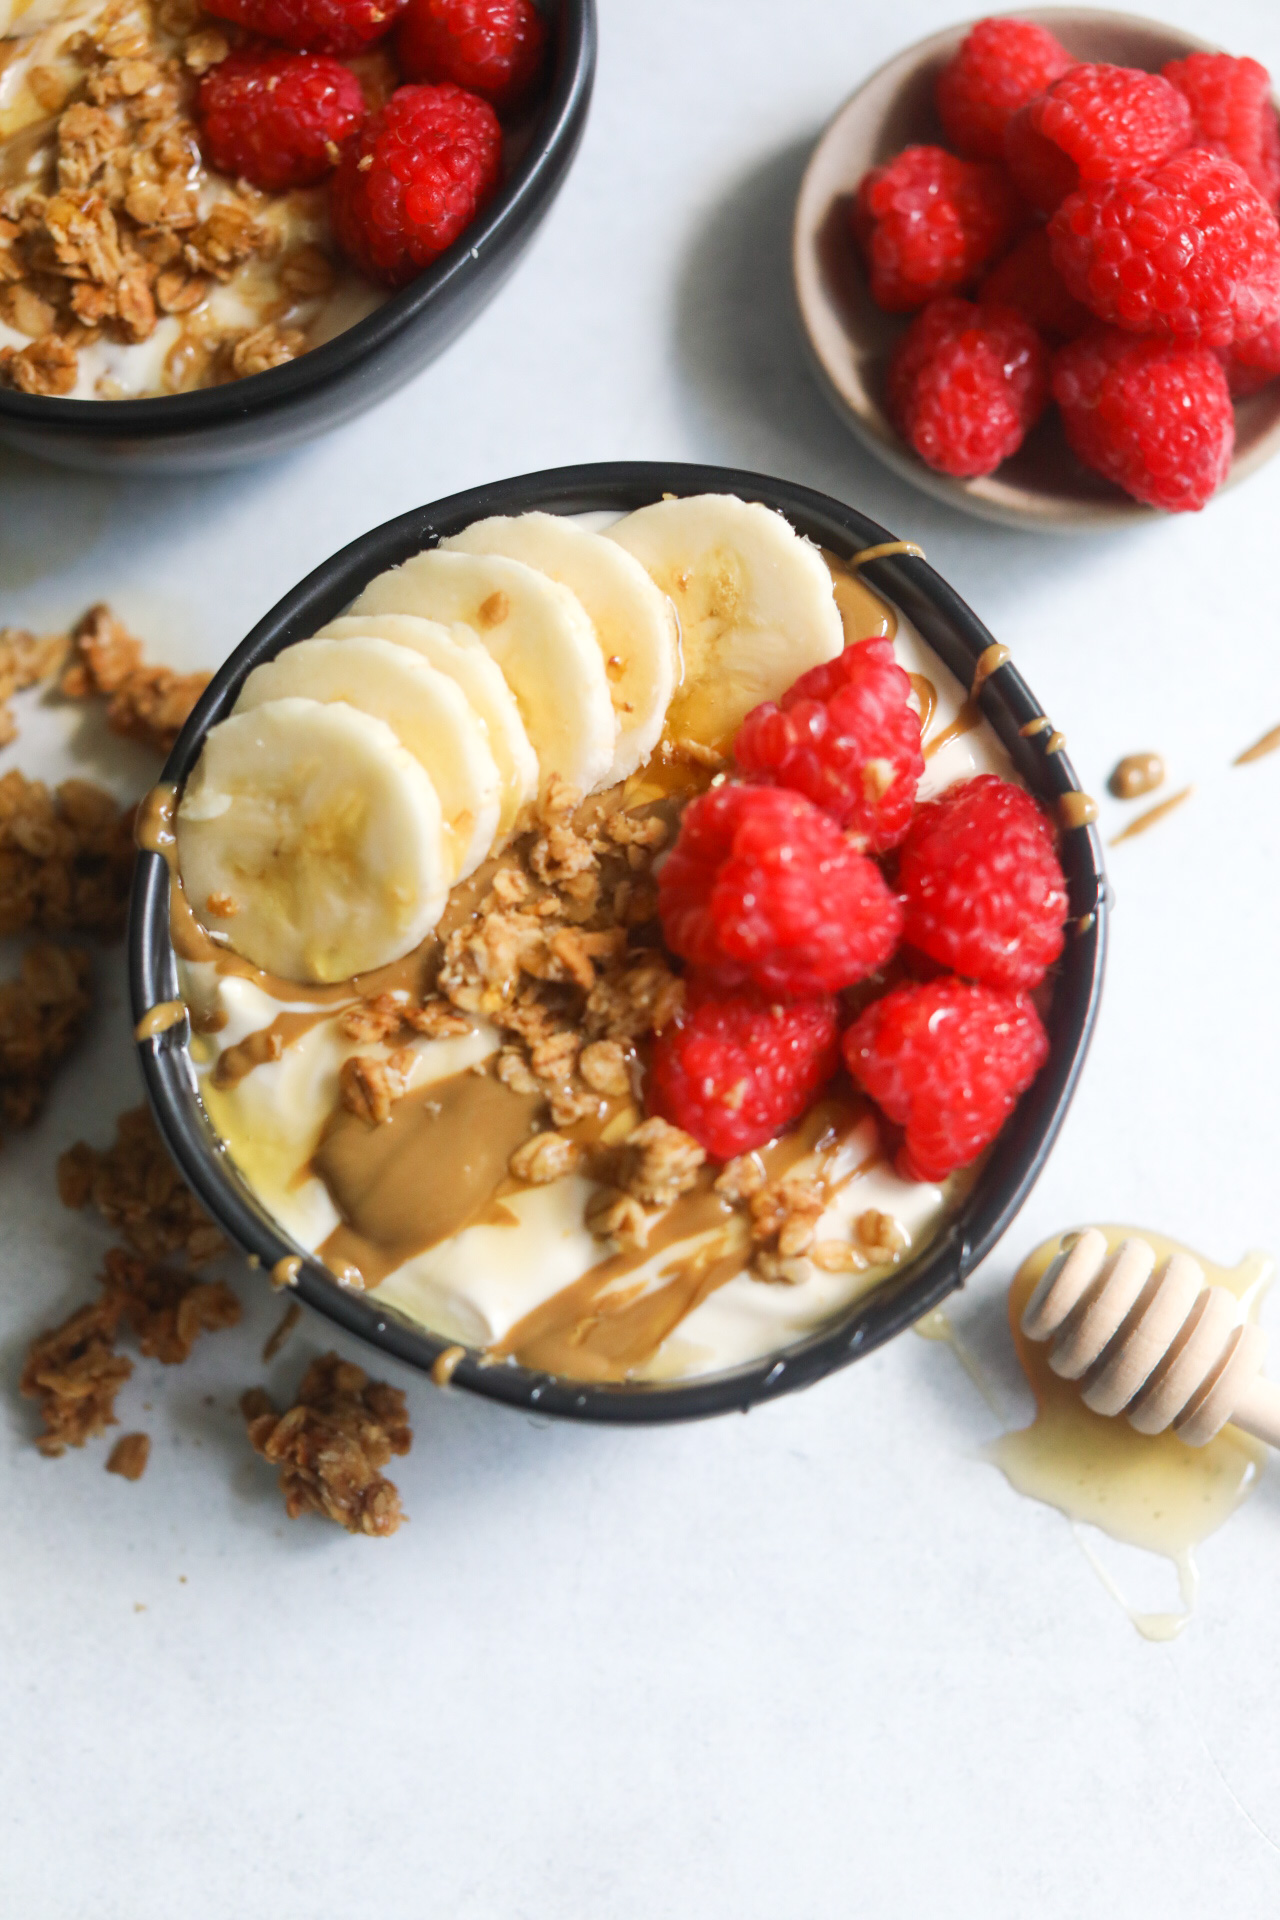 Whipped yogurt in a black bowl topped with sliced bananas, raspberries, granola and drizzled honey and sunflower butter. One bowl is centered and off centered is the corner of another dressed bowl with a small bowl of raspberres to the right in a small bowl.